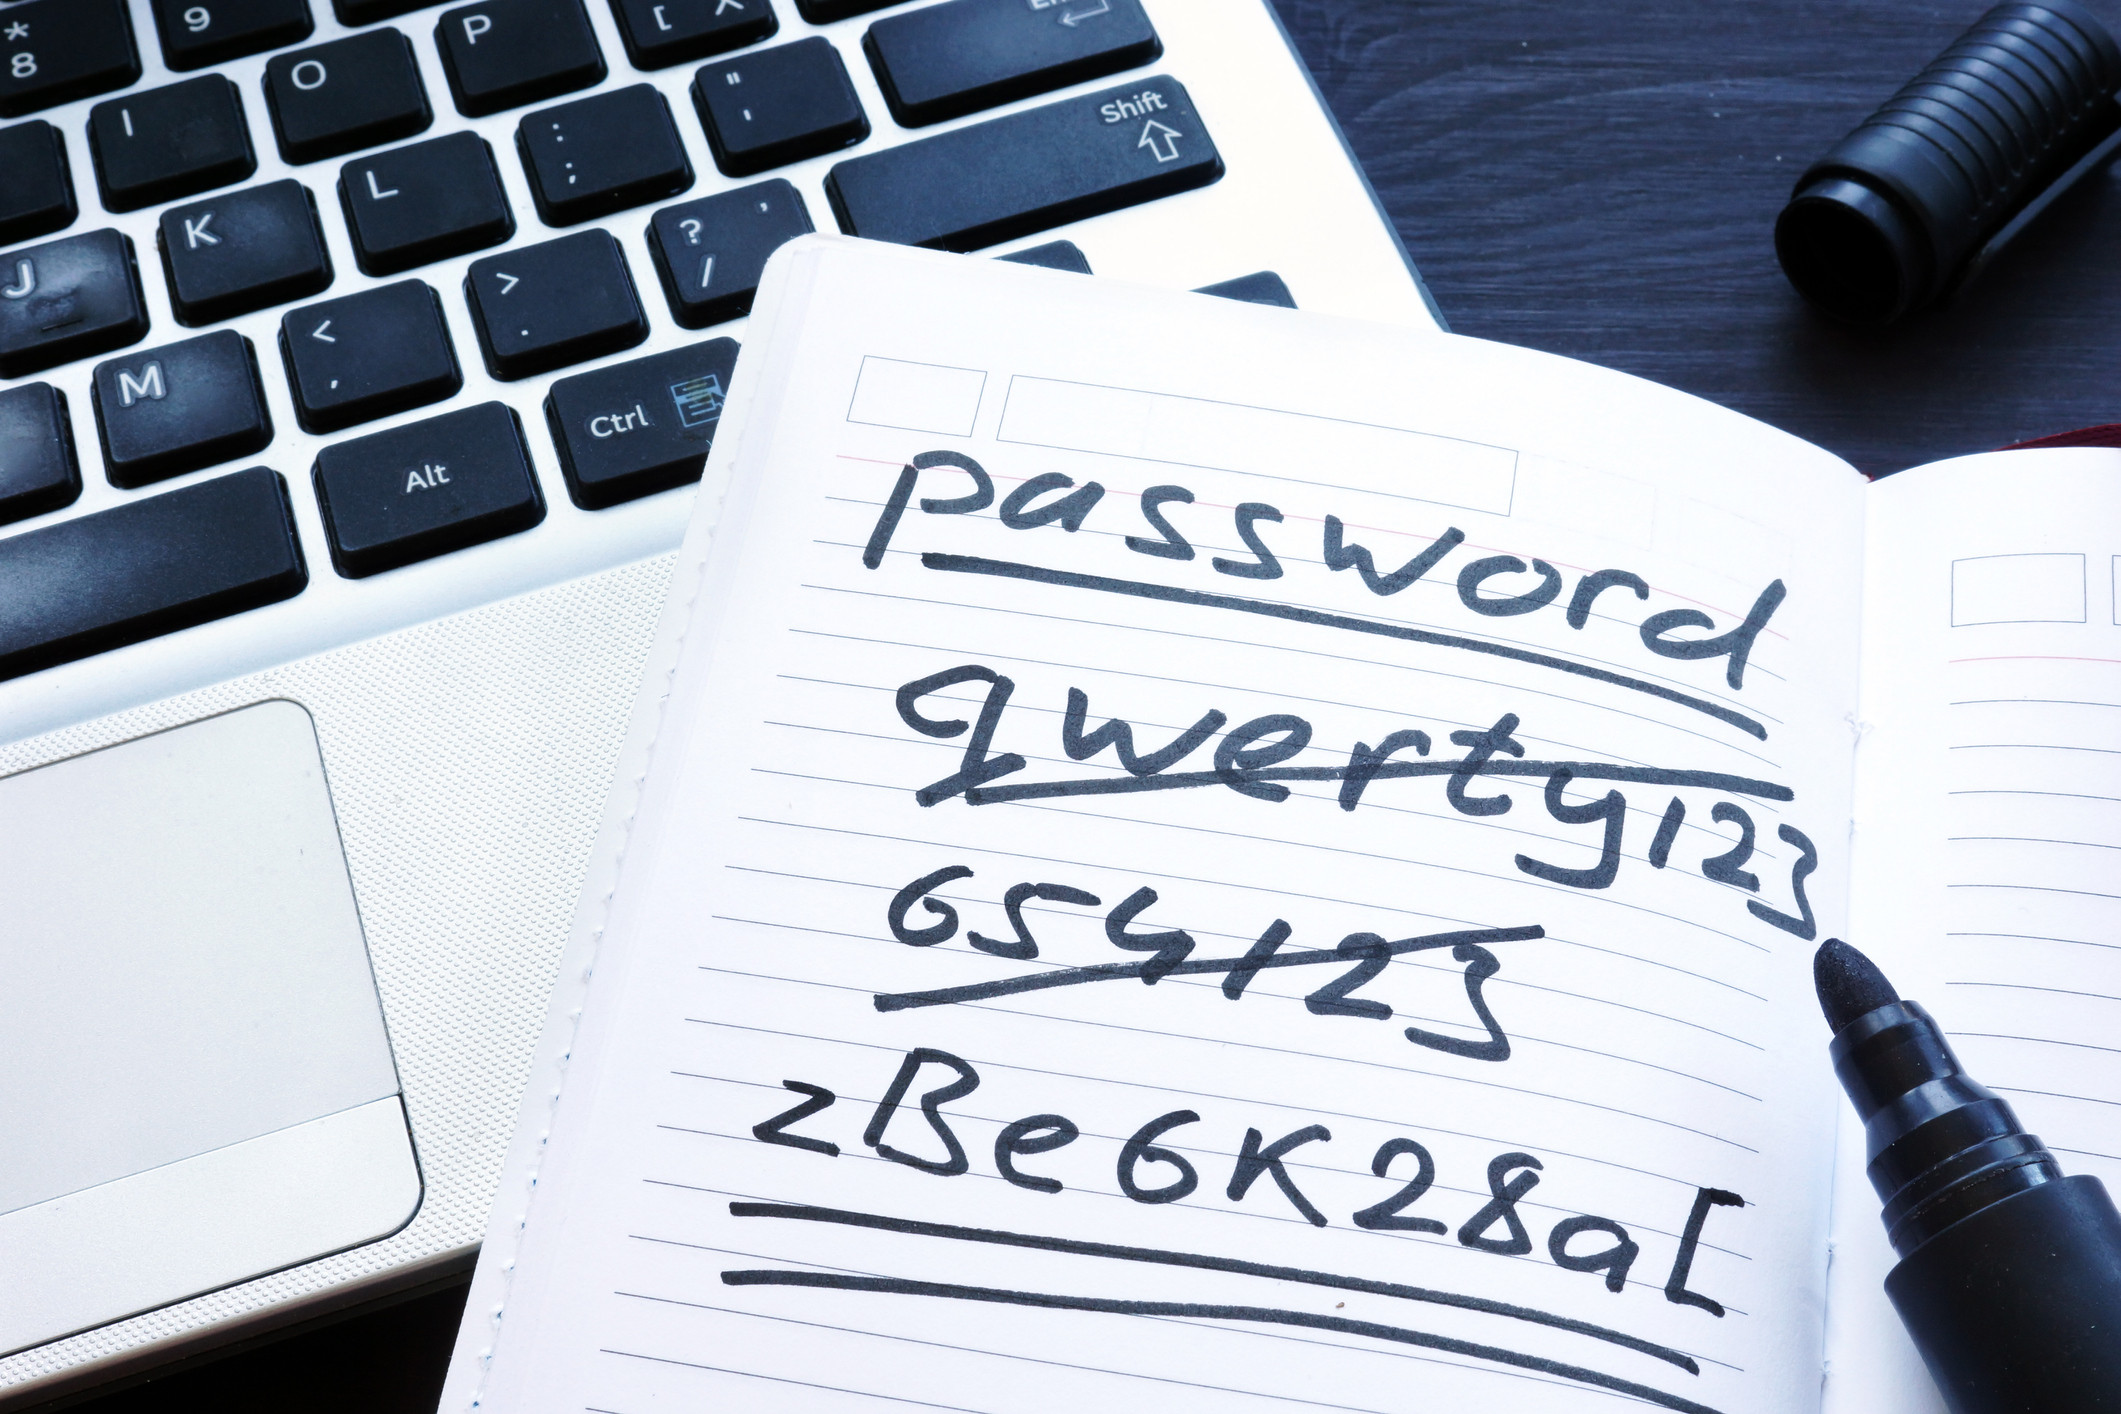 Weak passwords crossed out with a secure password double-underlined, exemplifying best practices to protect against cloud security challenges and risks.